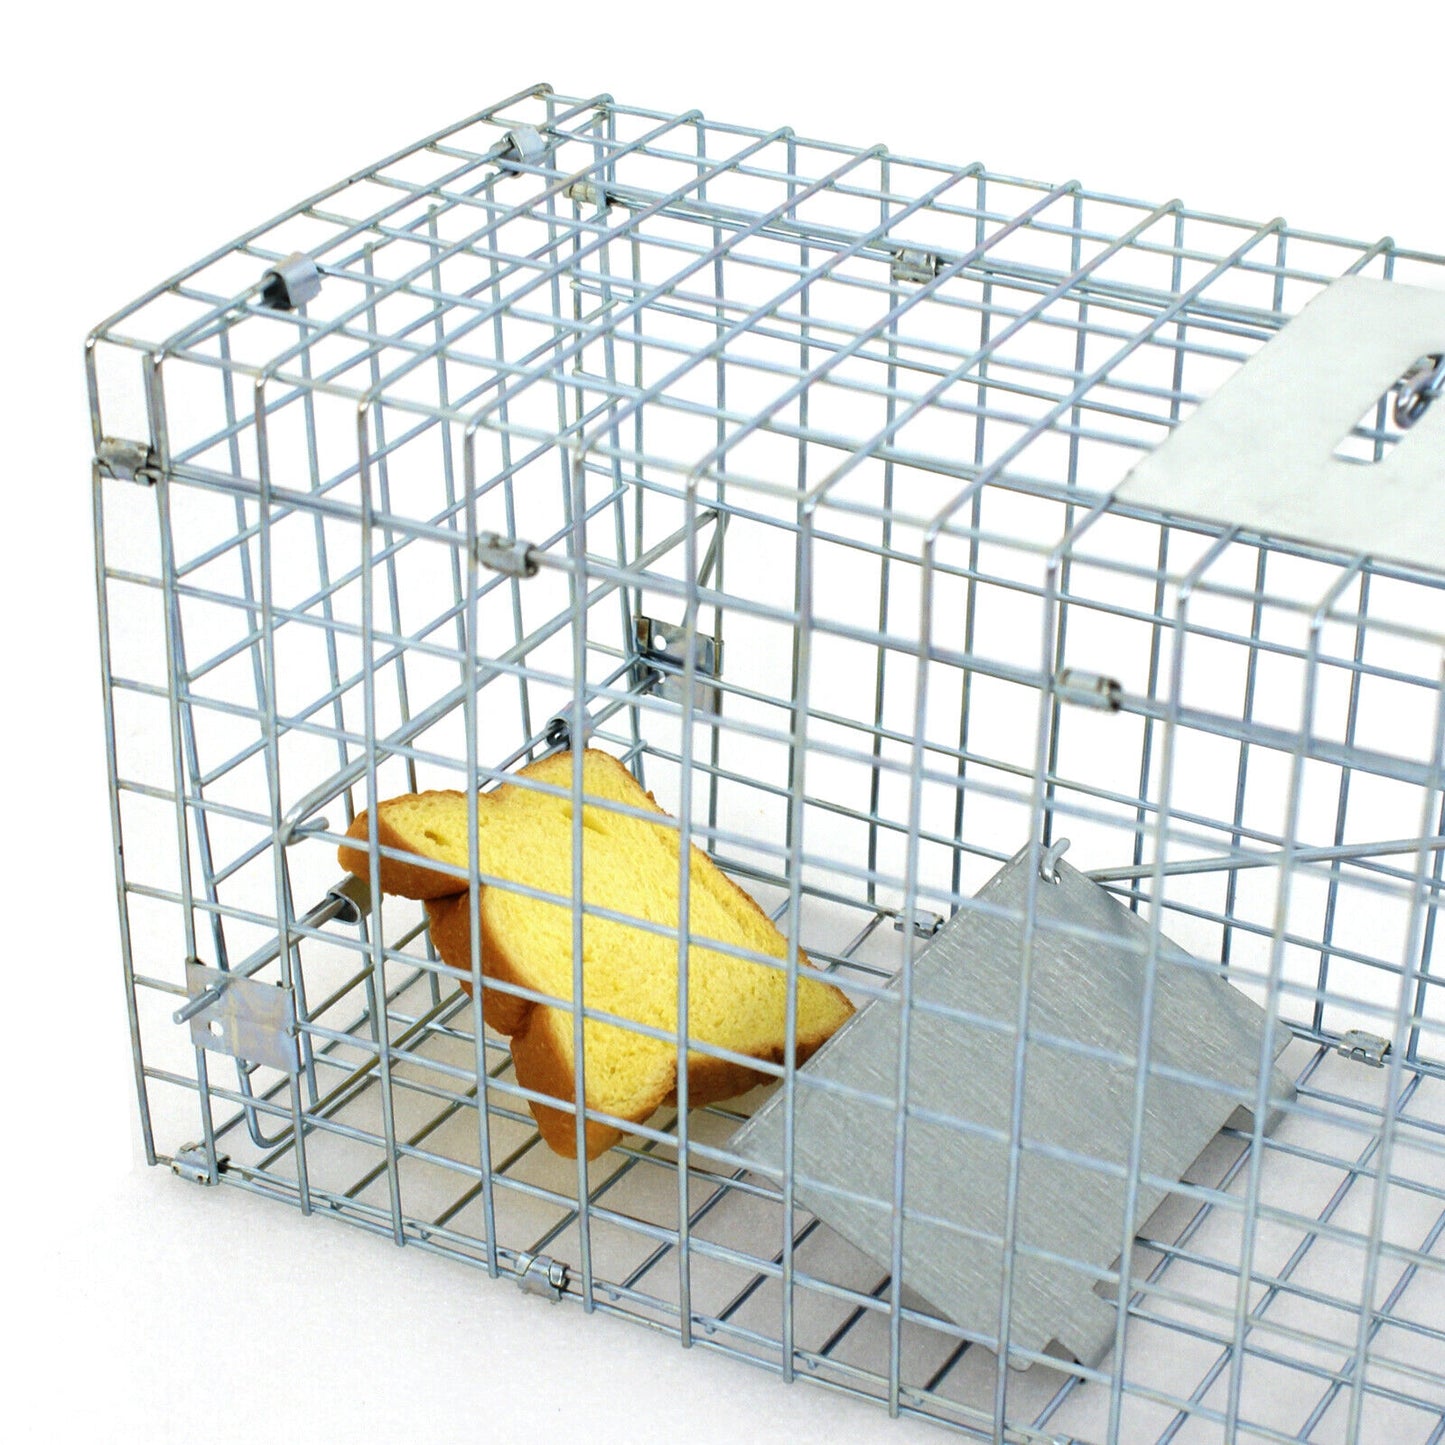 Live Animal Cage Mouse Trap Rat Hamster Catch Control Bait Hunting Survival New